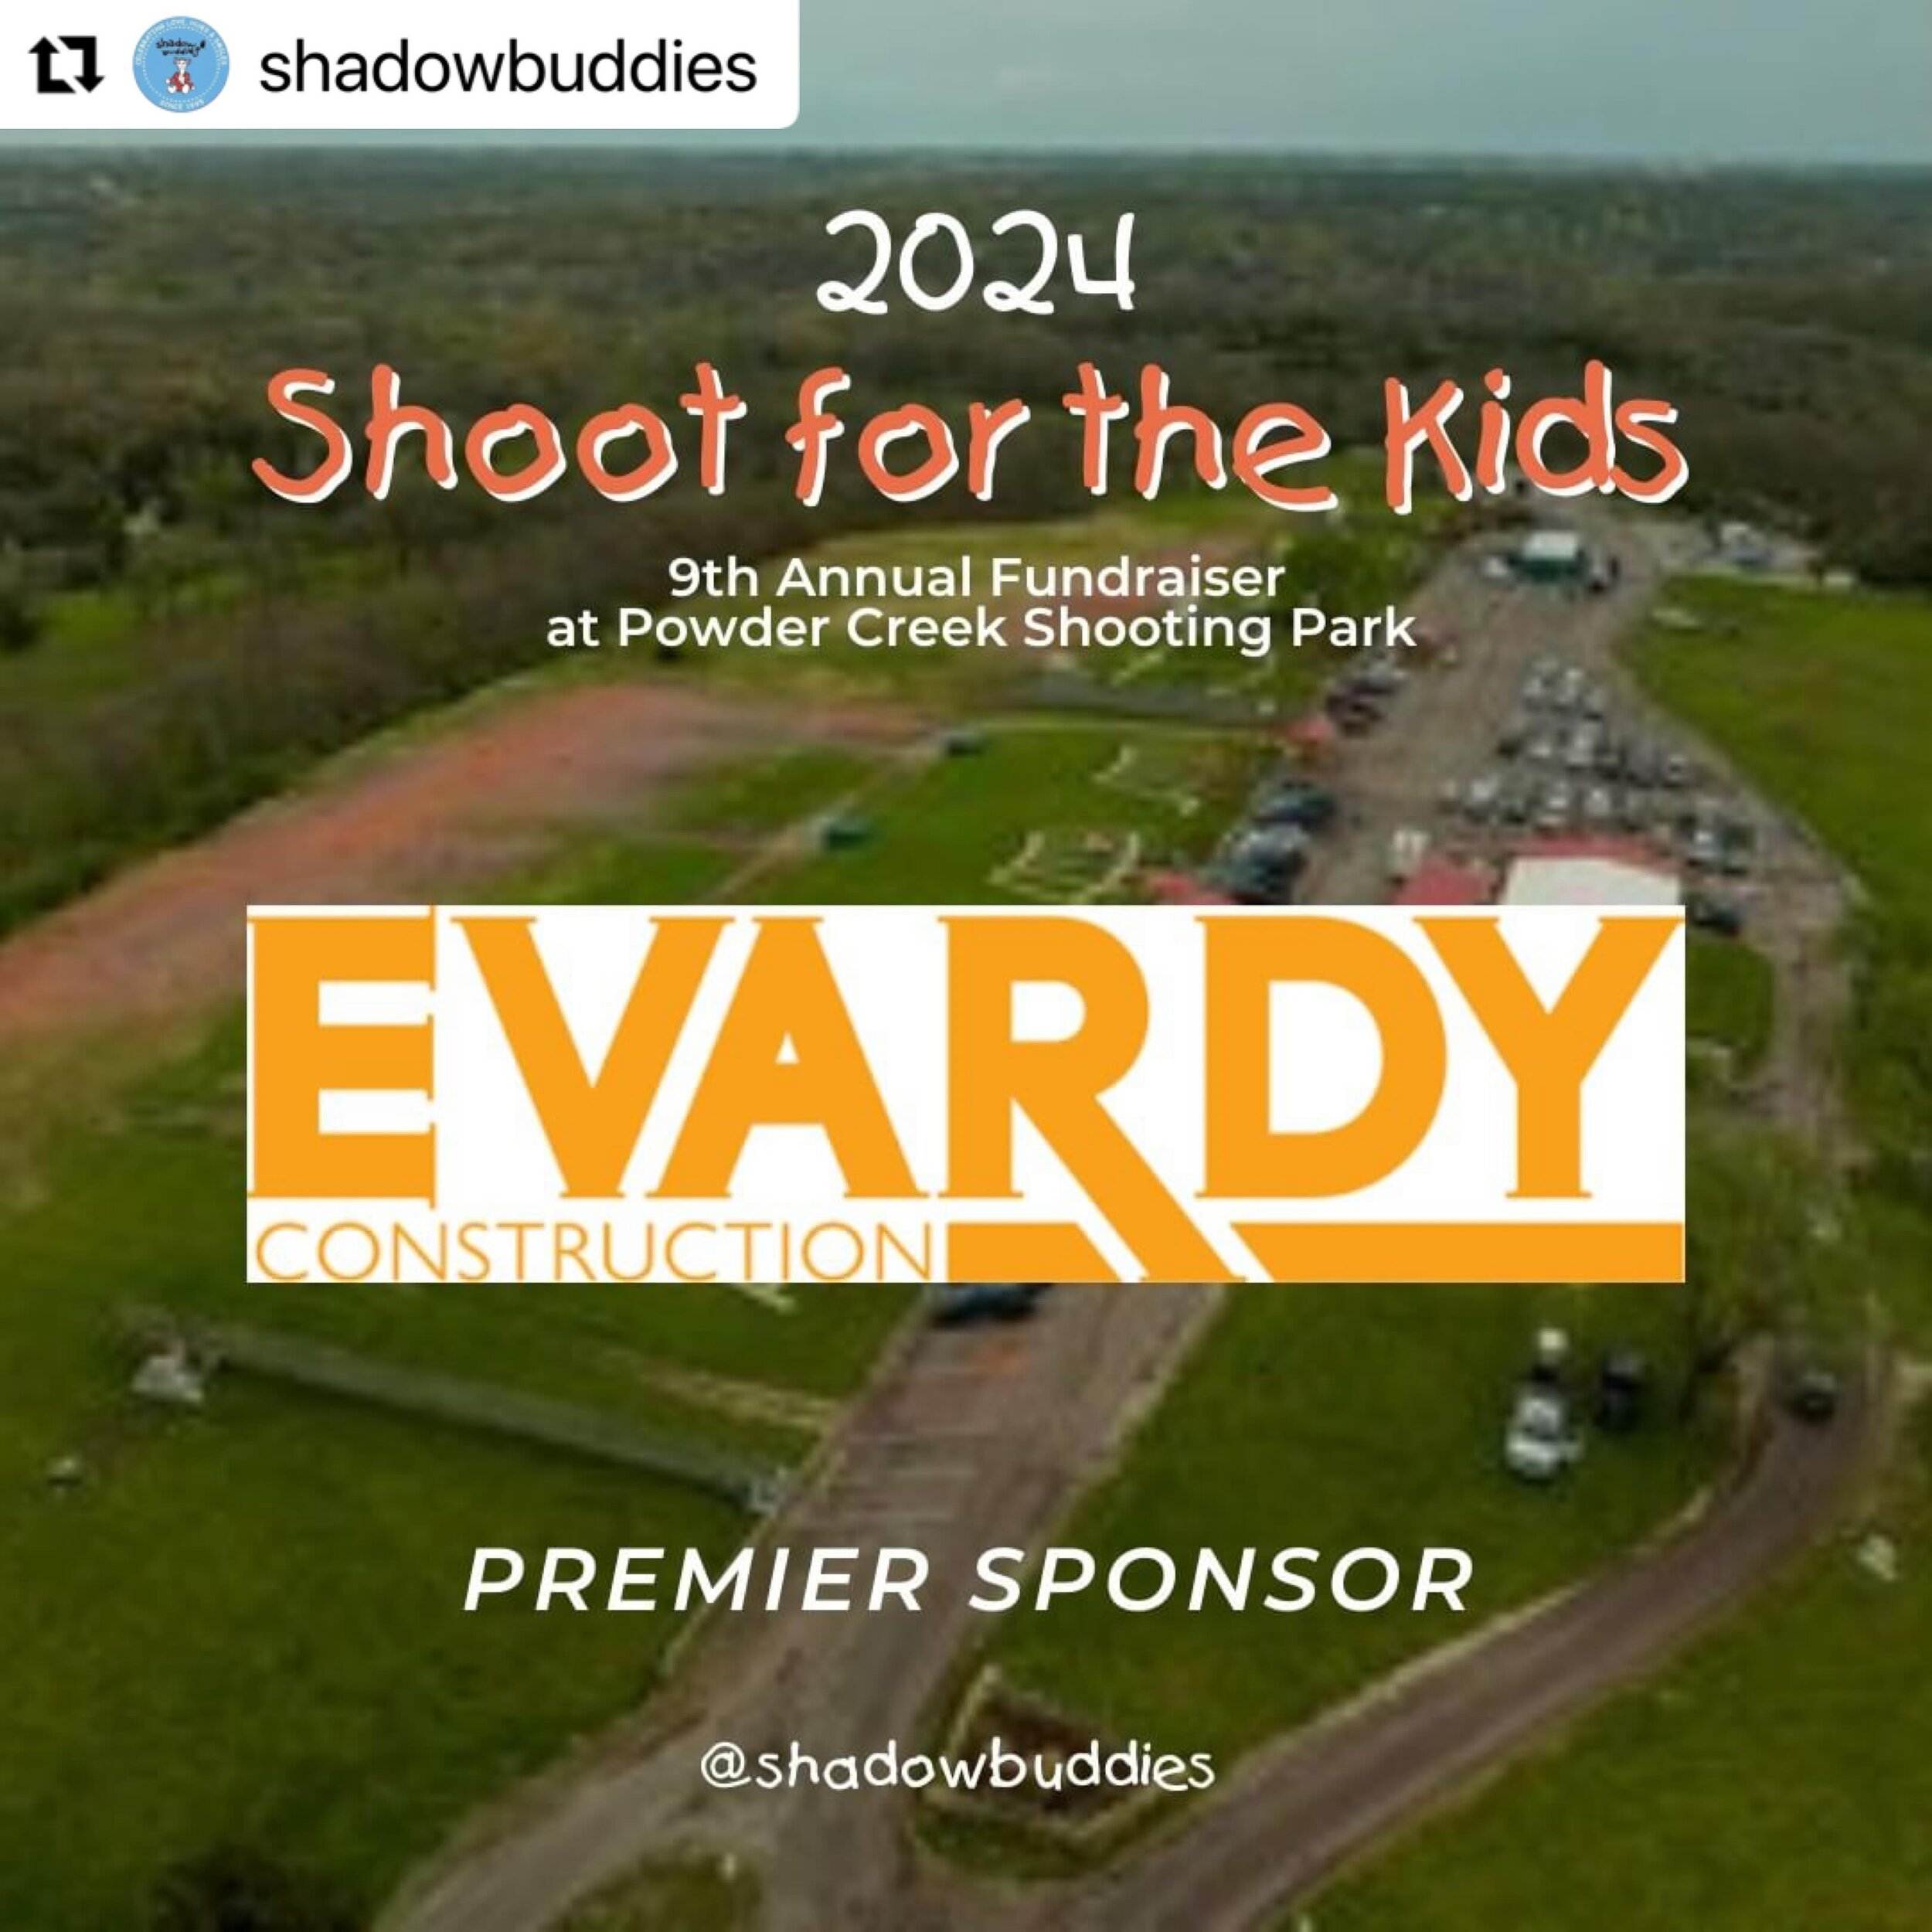 We are thrilled to support such a fun event - and incredible organization. 
Follow @shadowbuddies and visit their website to learn more, donate, and join us for the 9th annual Shoot for the Kids fundraiser on April 25!

#Repost @shadowbuddies
・・・
Tha